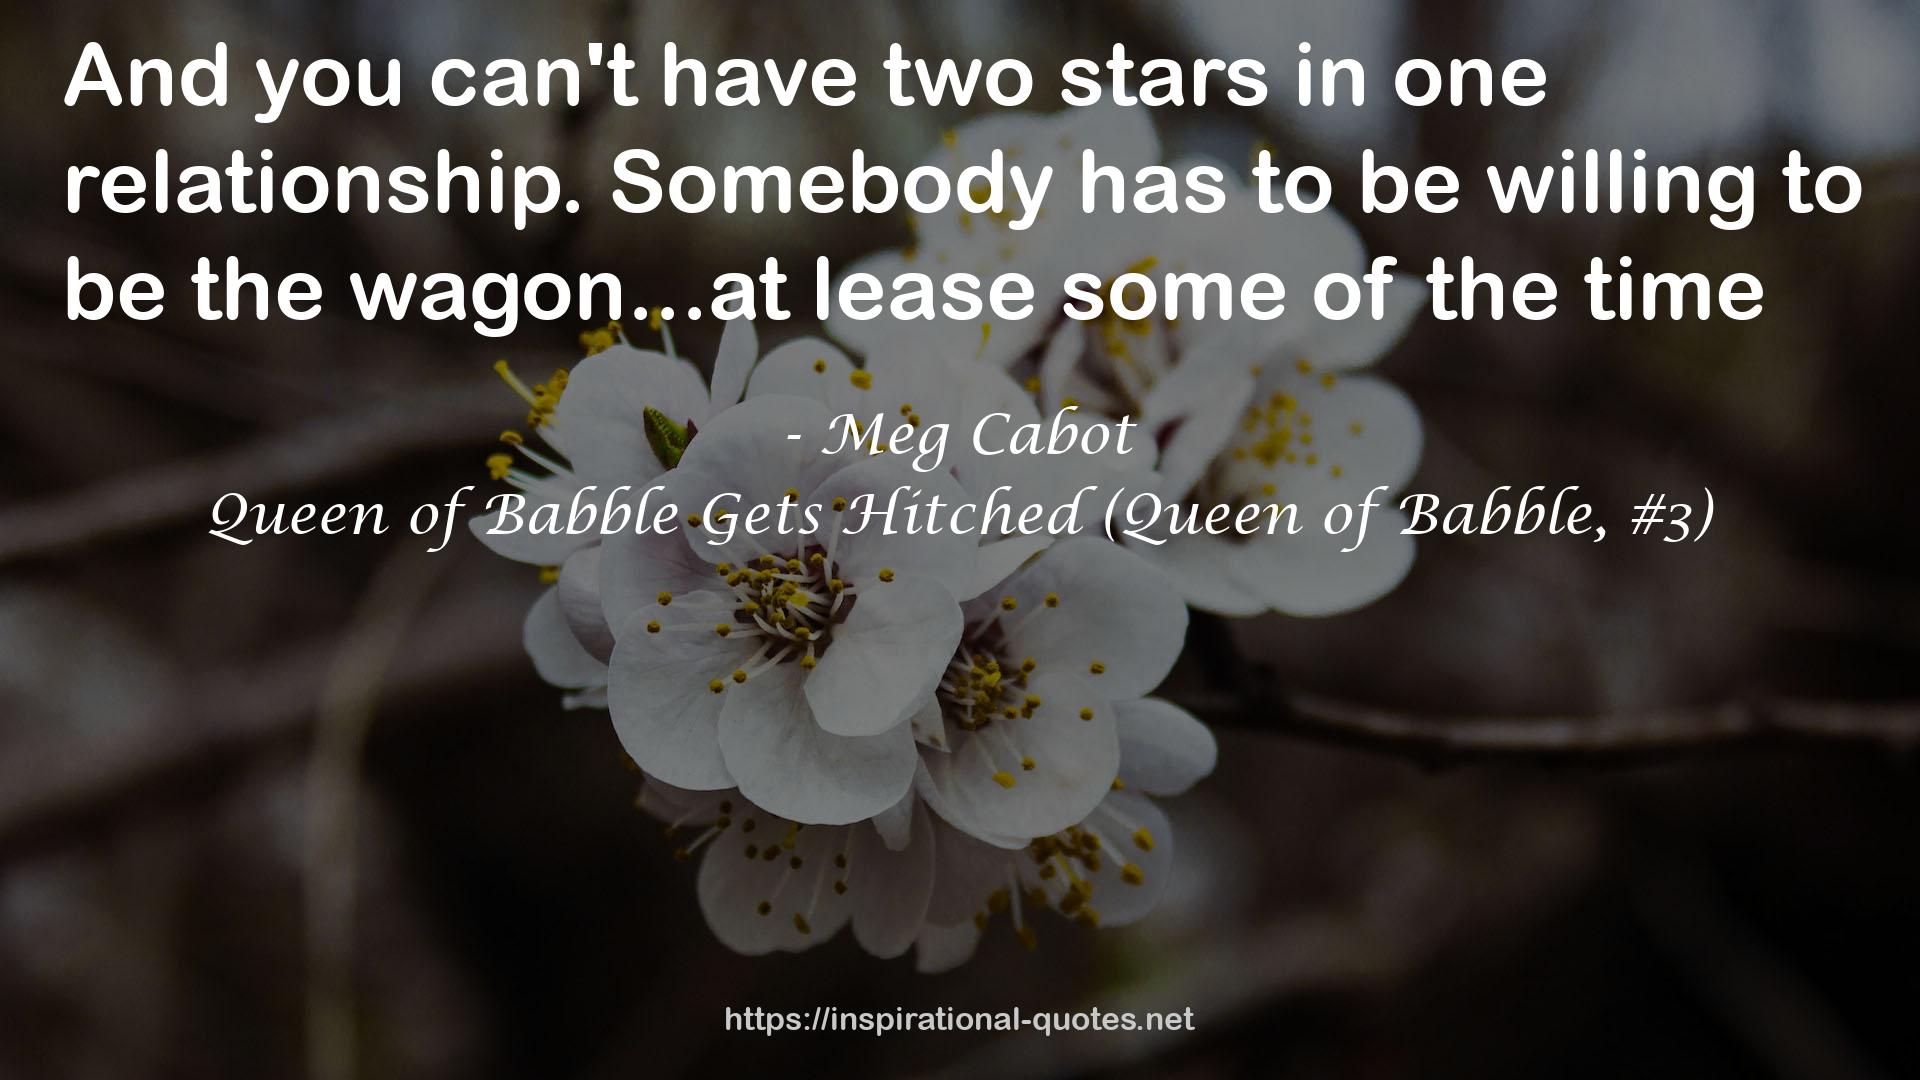 Queen of Babble Gets Hitched (Queen of Babble, #3) QUOTES